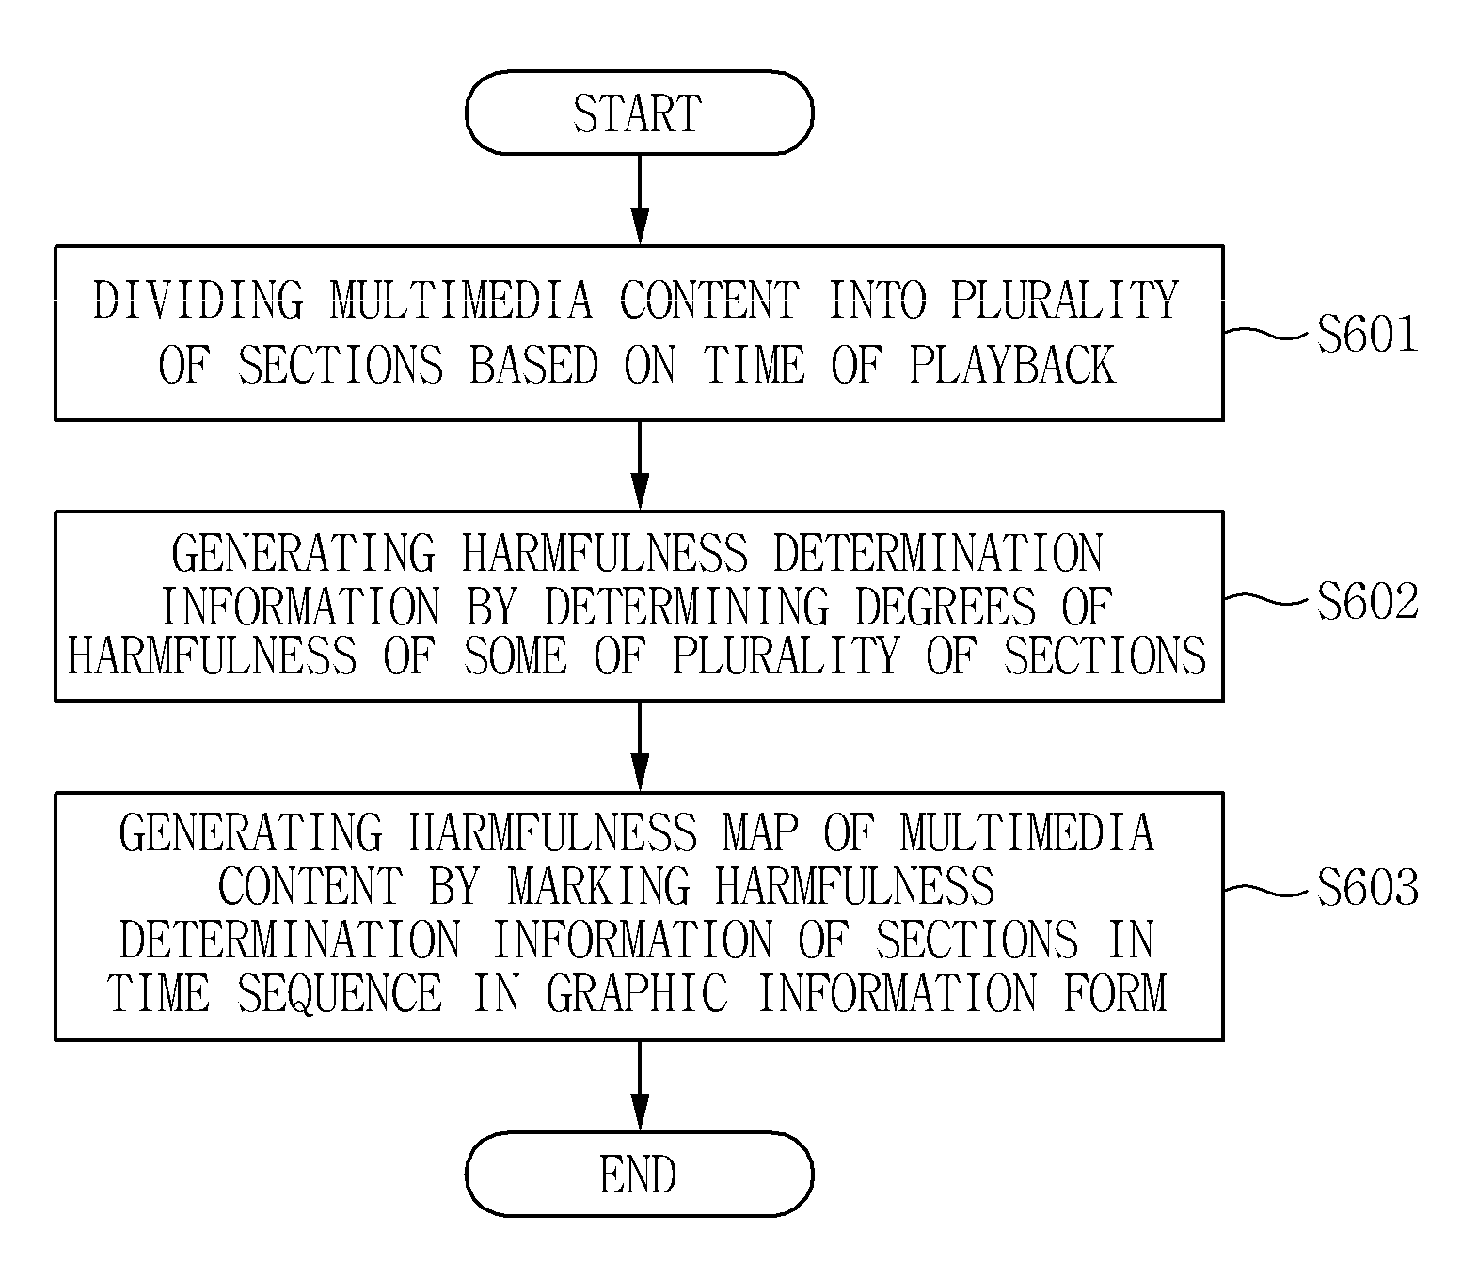 Apparatus and method for generating harmfulness maps